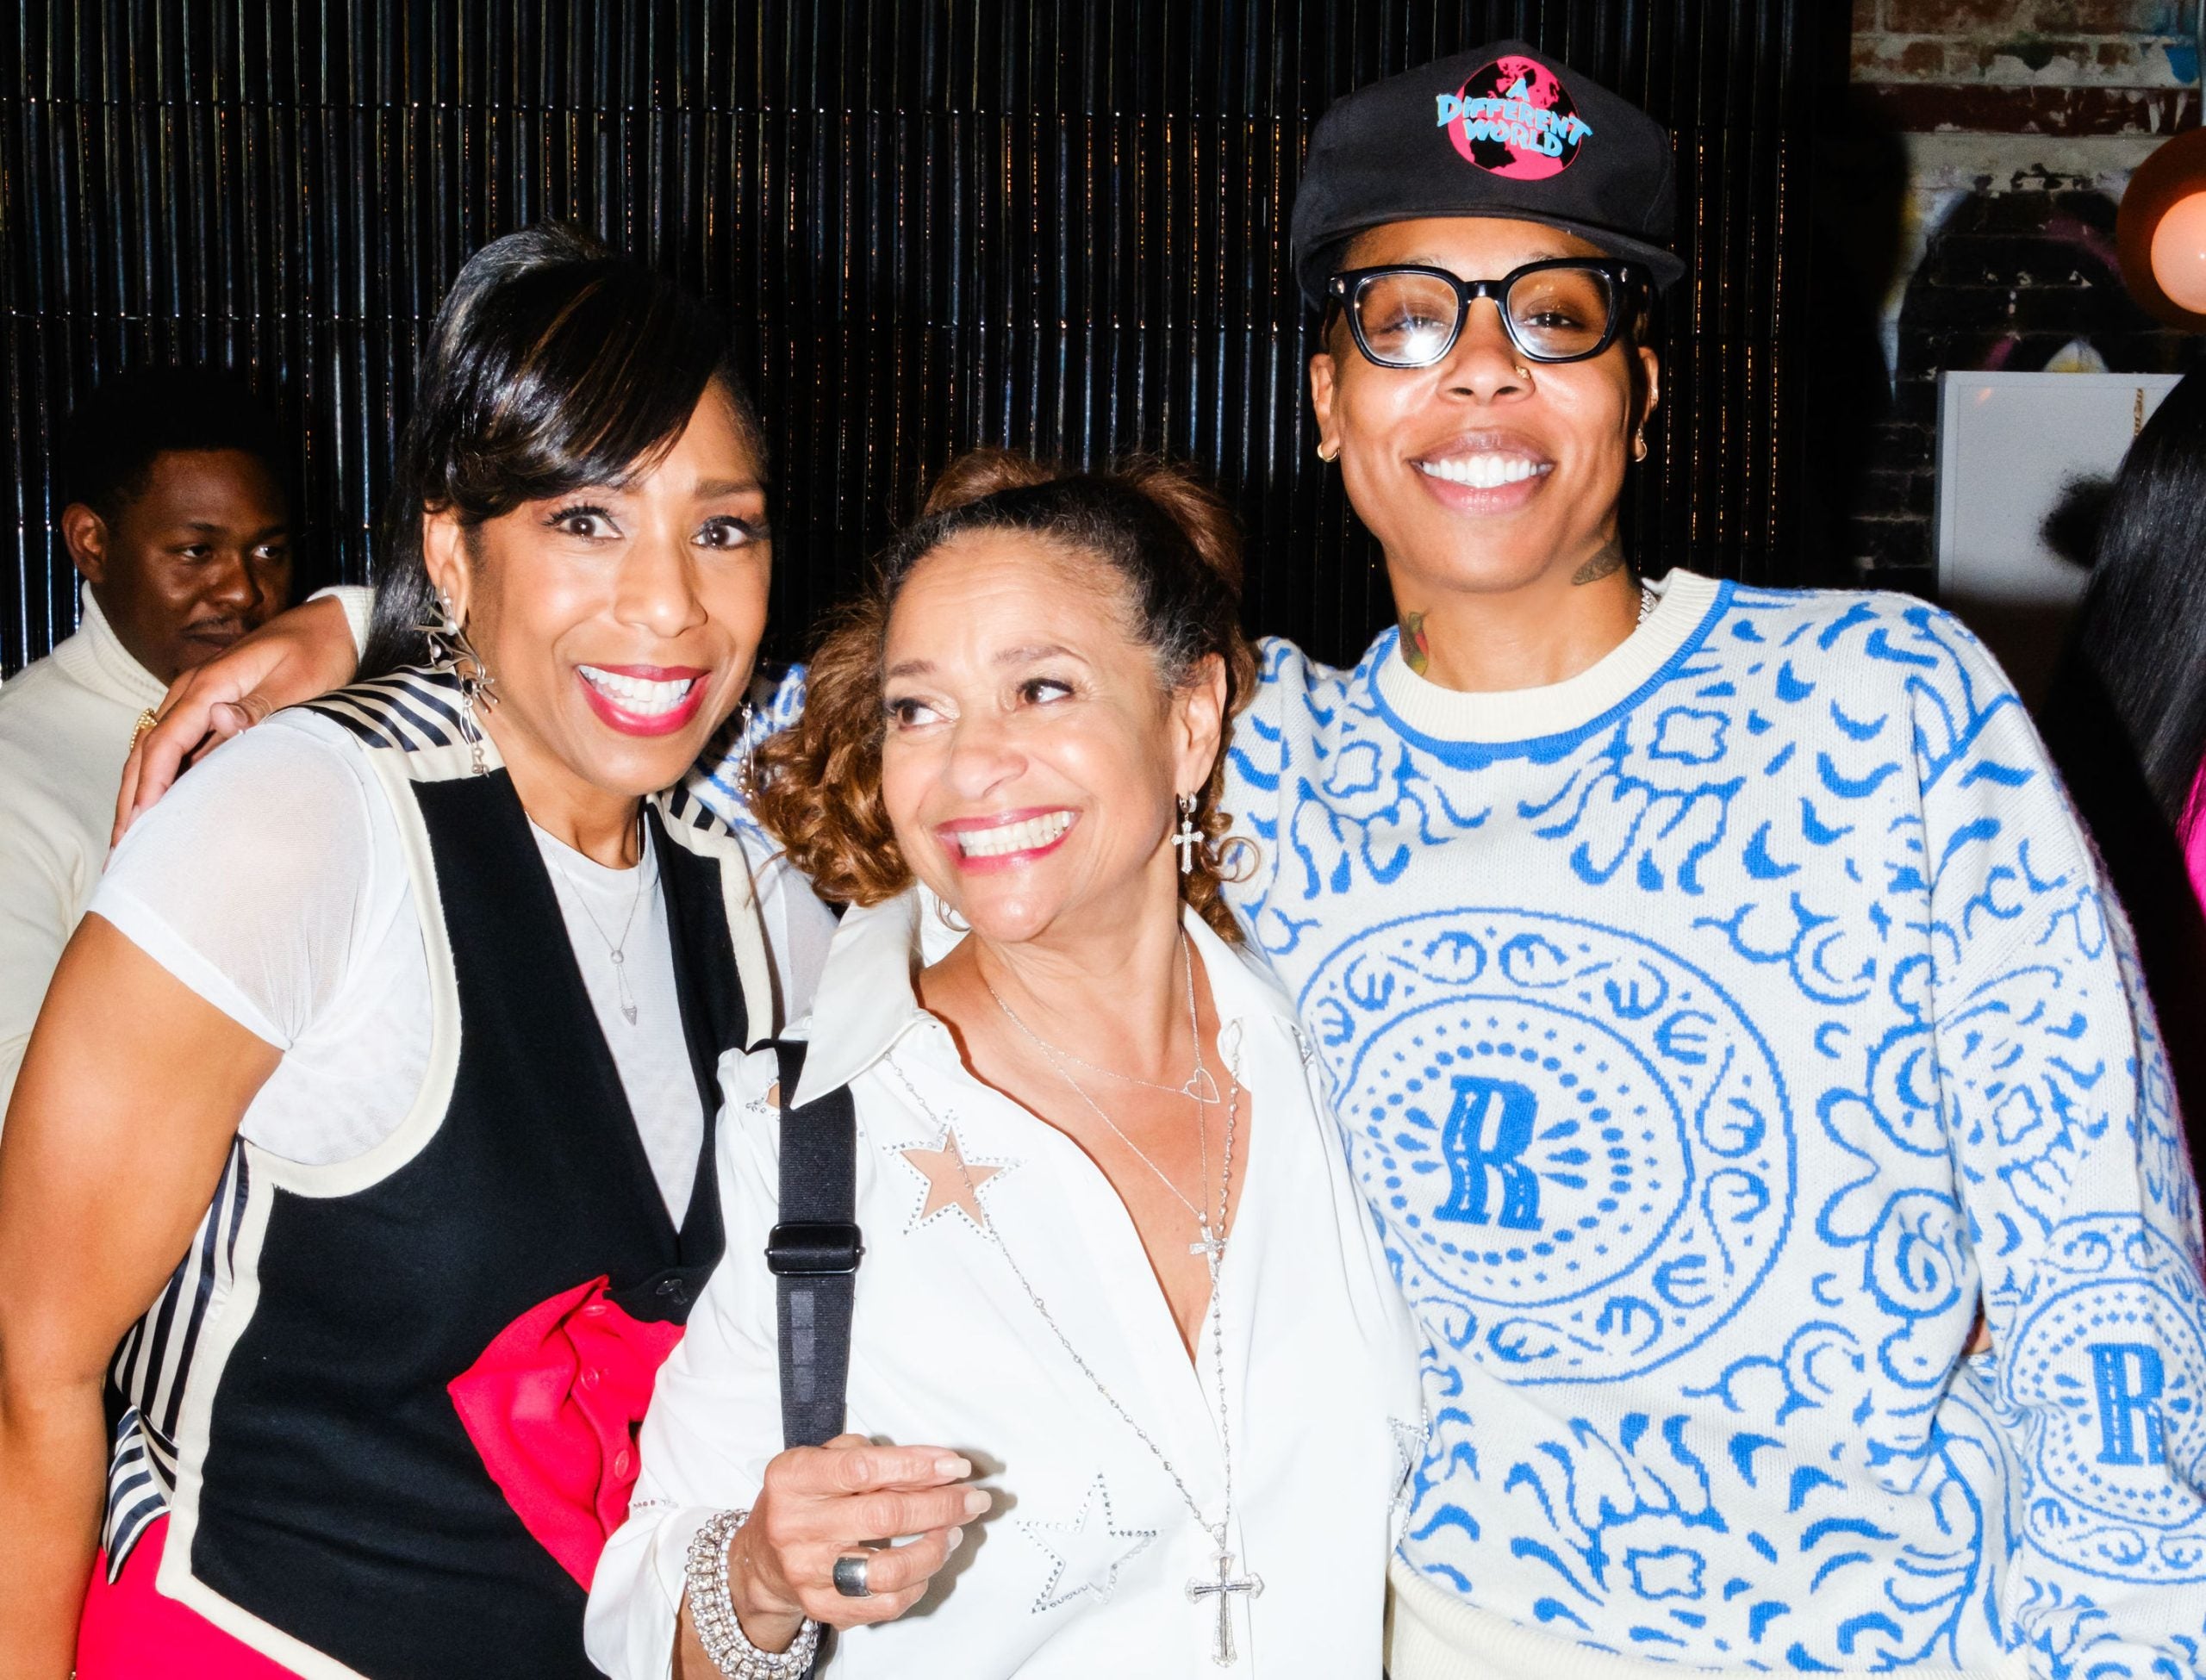 Debbie Allen Gives A Lesson On How To Use Your Power at Hillman Grad Women On The Rise Event